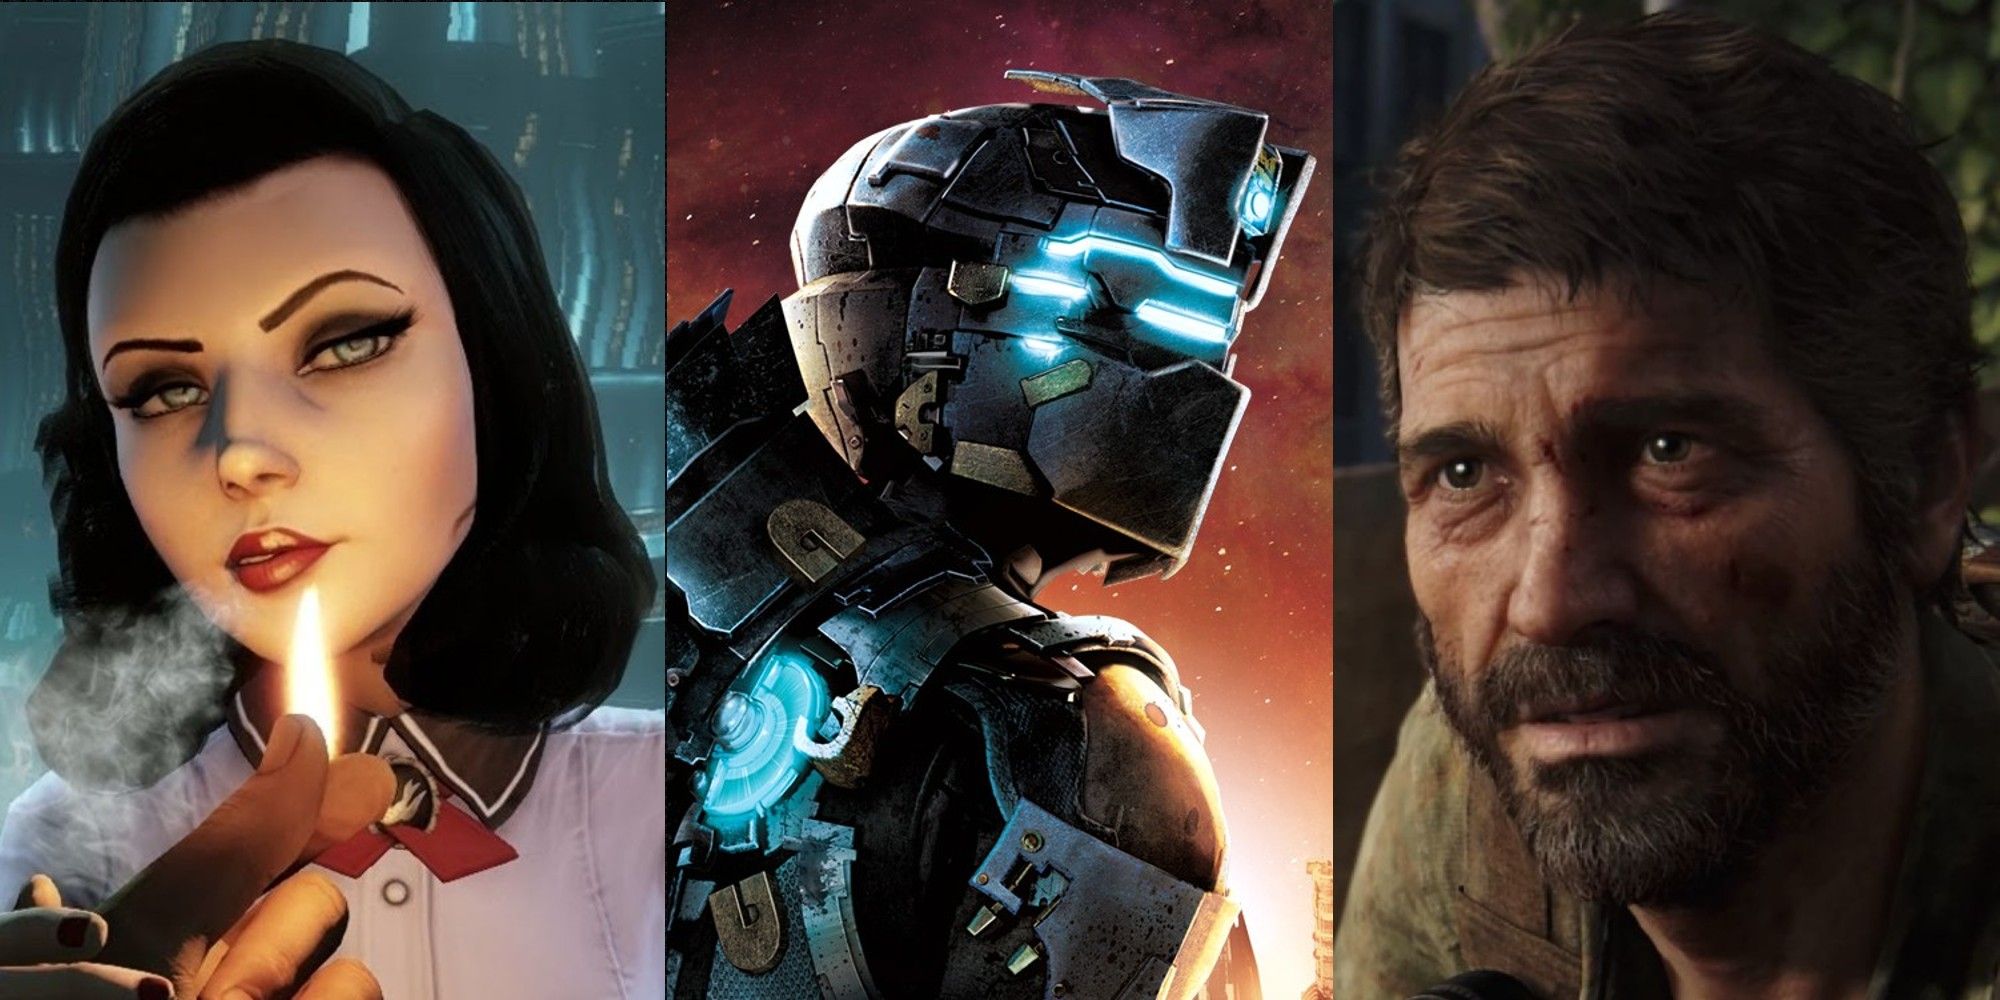 A split image including close ups of Elizabeth from Bioshock, Isaac from Dead Space, and Joel from The Last of Us